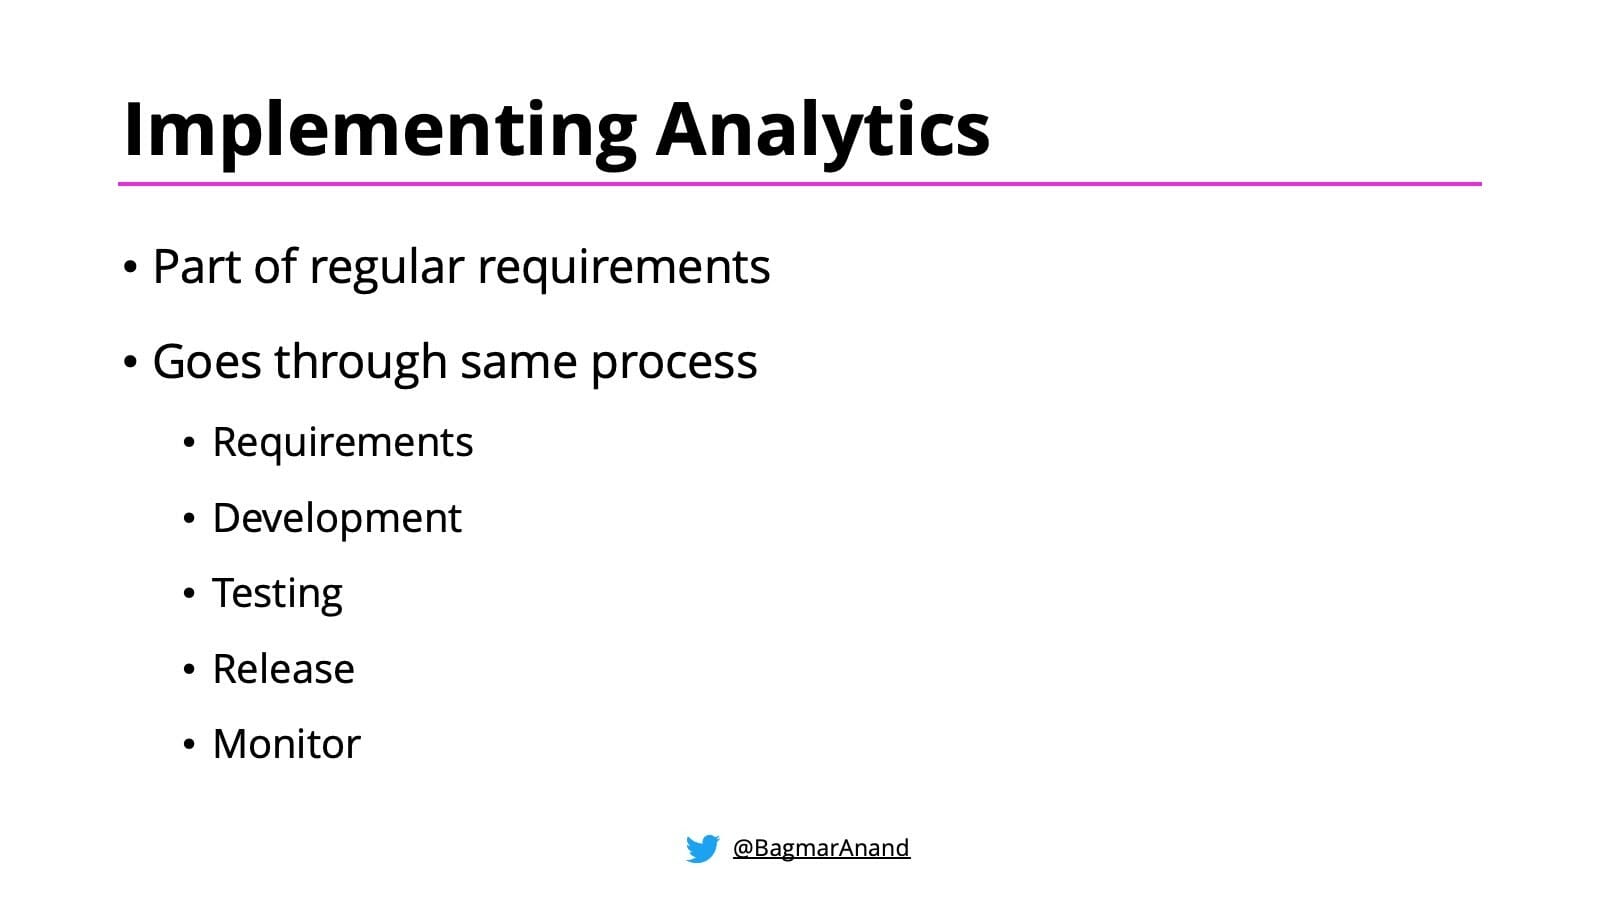 How to implement Analytics in your product?